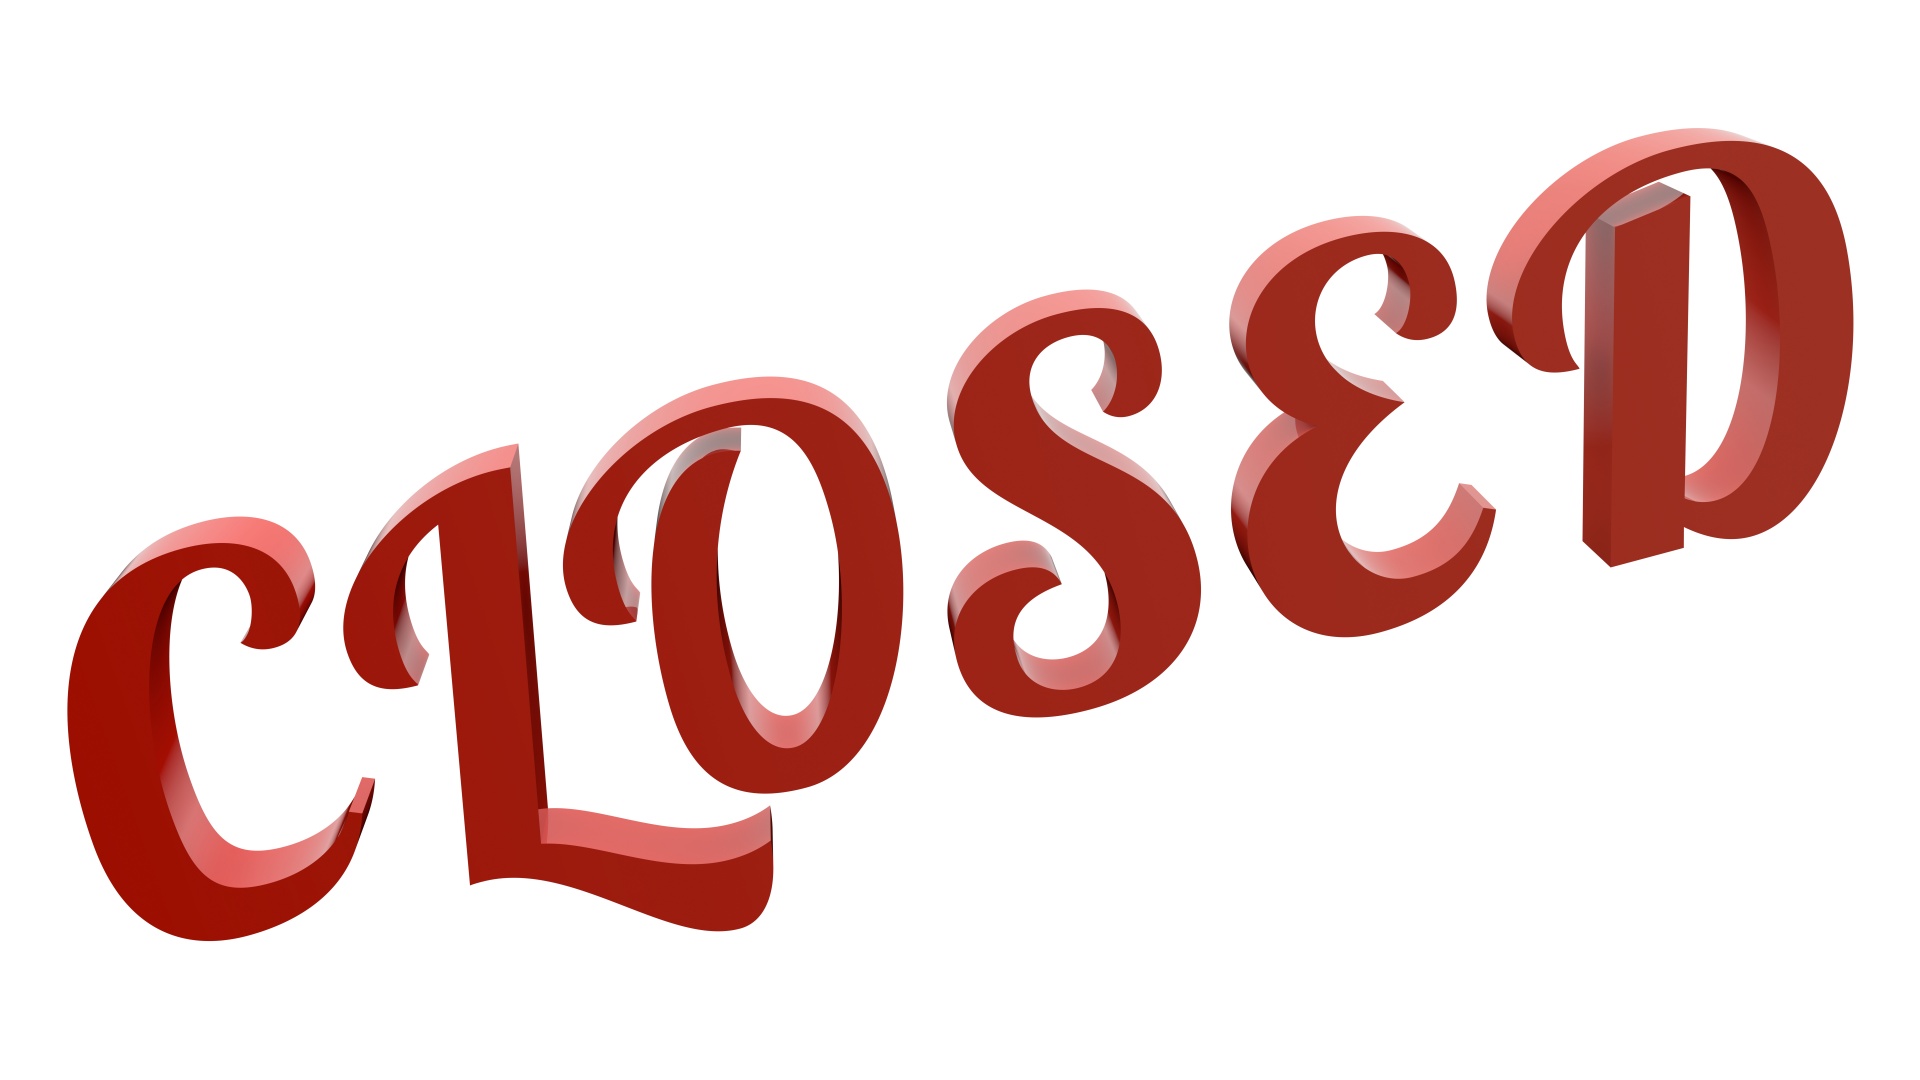 closed lobster font free photo